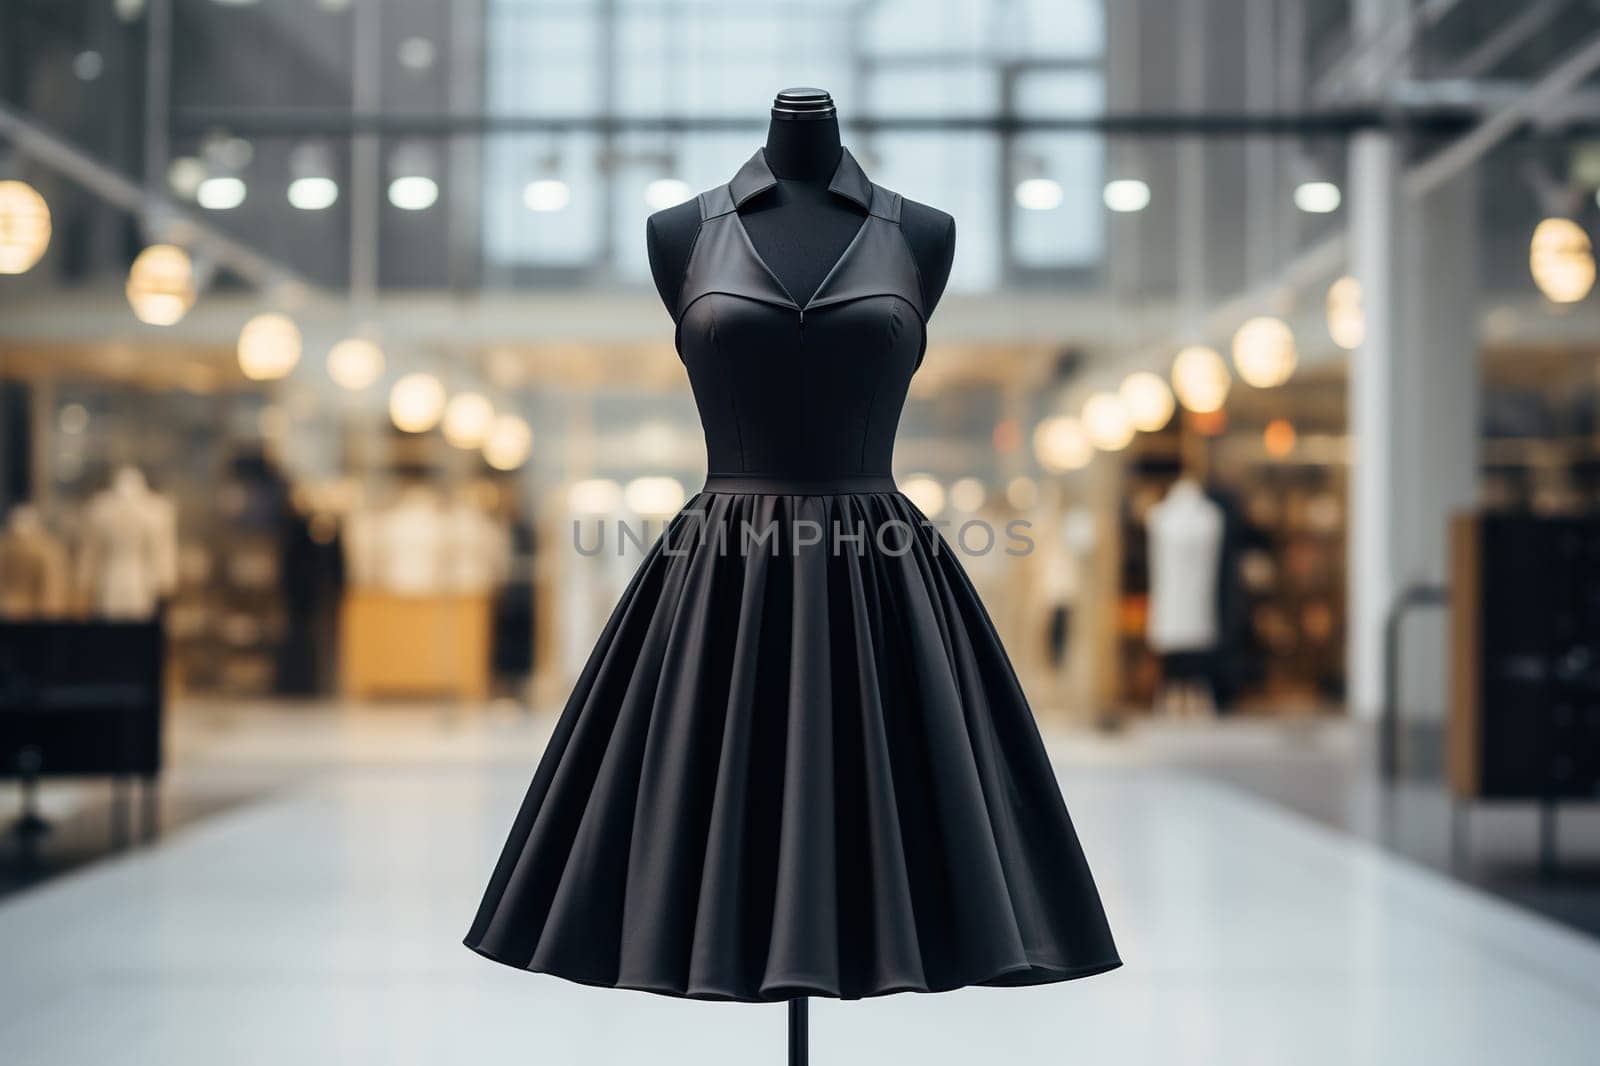 A beautiful black dress on a mannequin in a fashion salon. Shopping concept. Generated by artificial intelligence by Vovmar